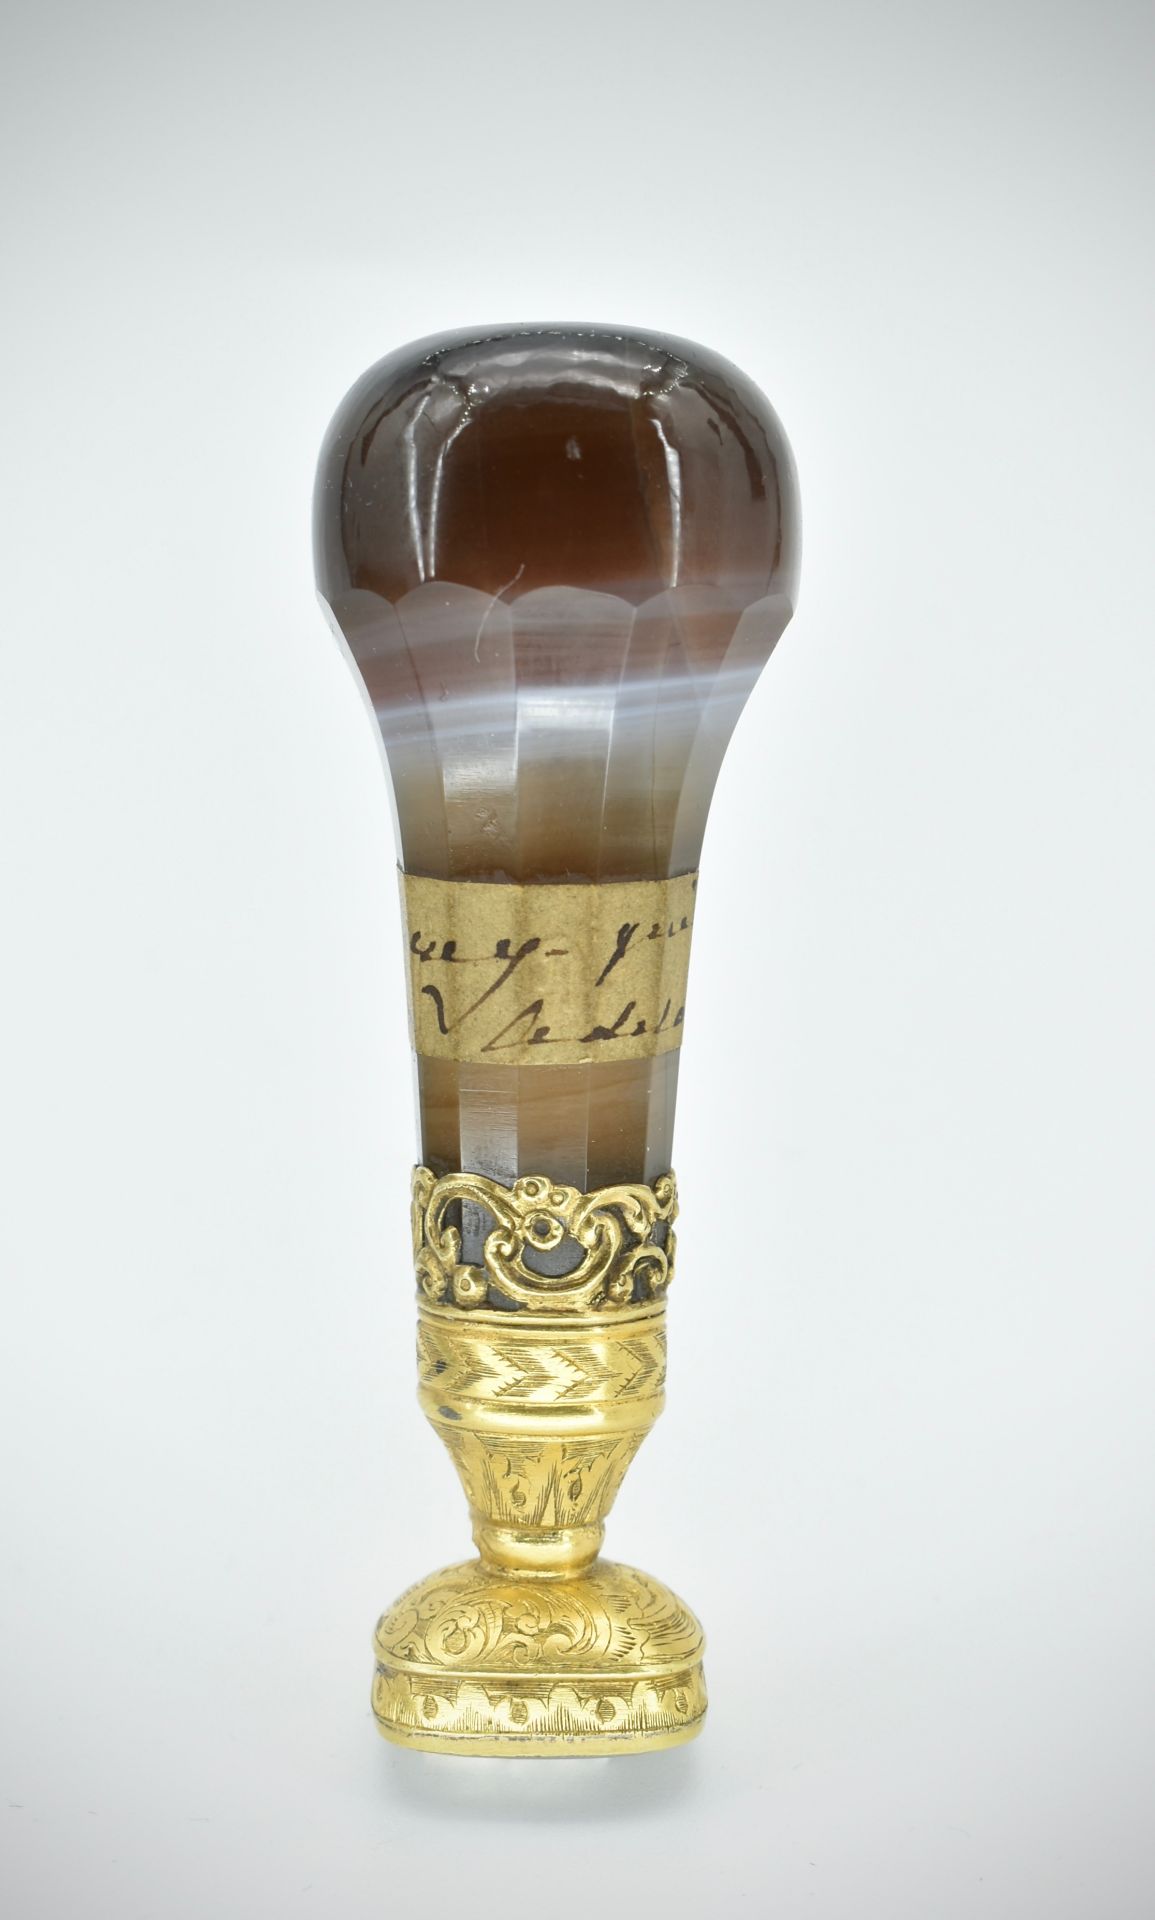 19th Century Banded Agate Desk Wax Seal - Image 3 of 7